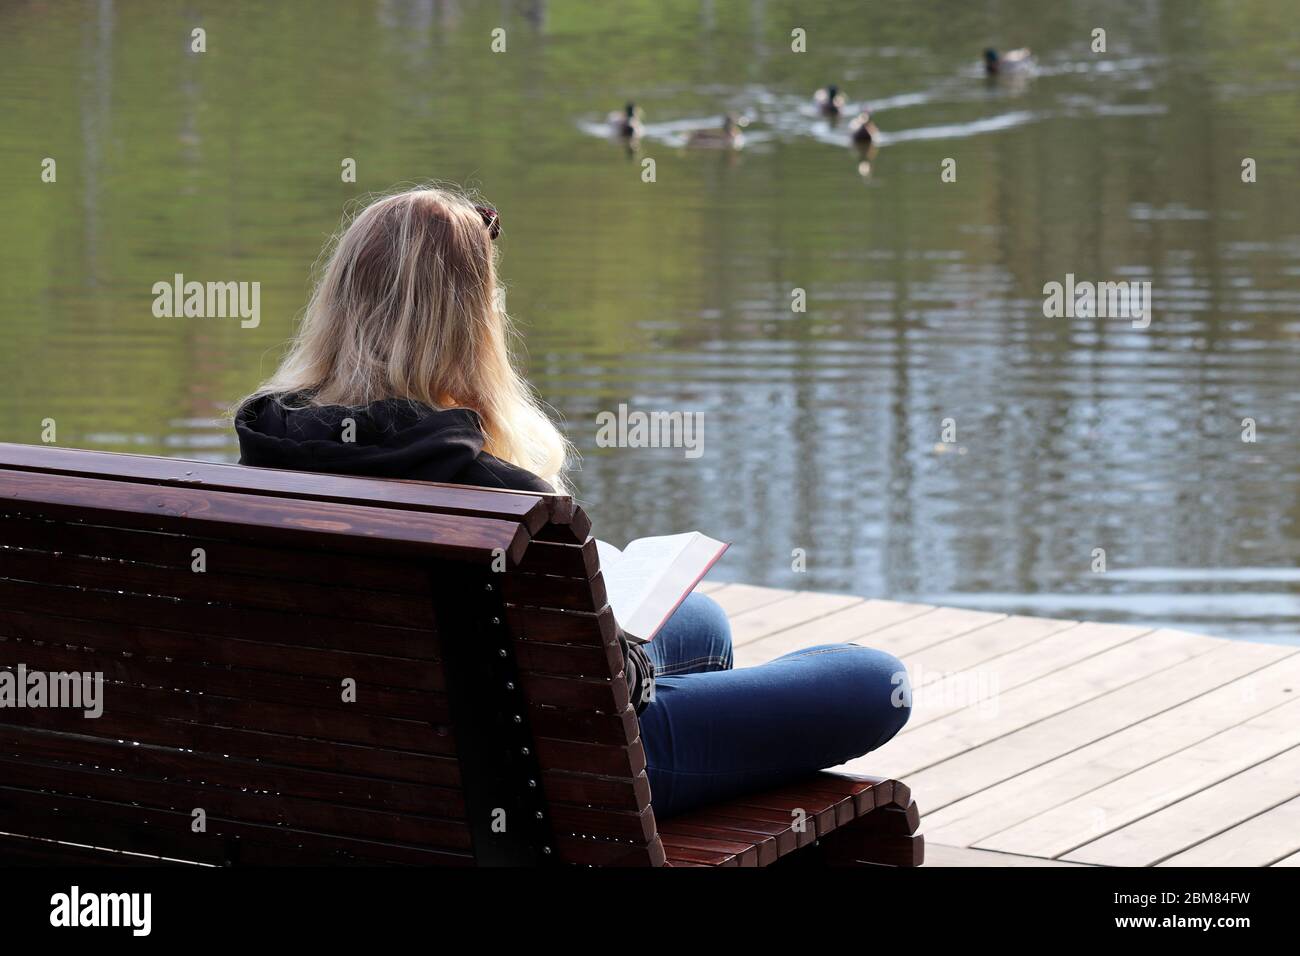 Blonde girl in jeans sitting with a book on wooden bench in a spring park on lake background. Concept of reading, leisure on nature Stock Photo